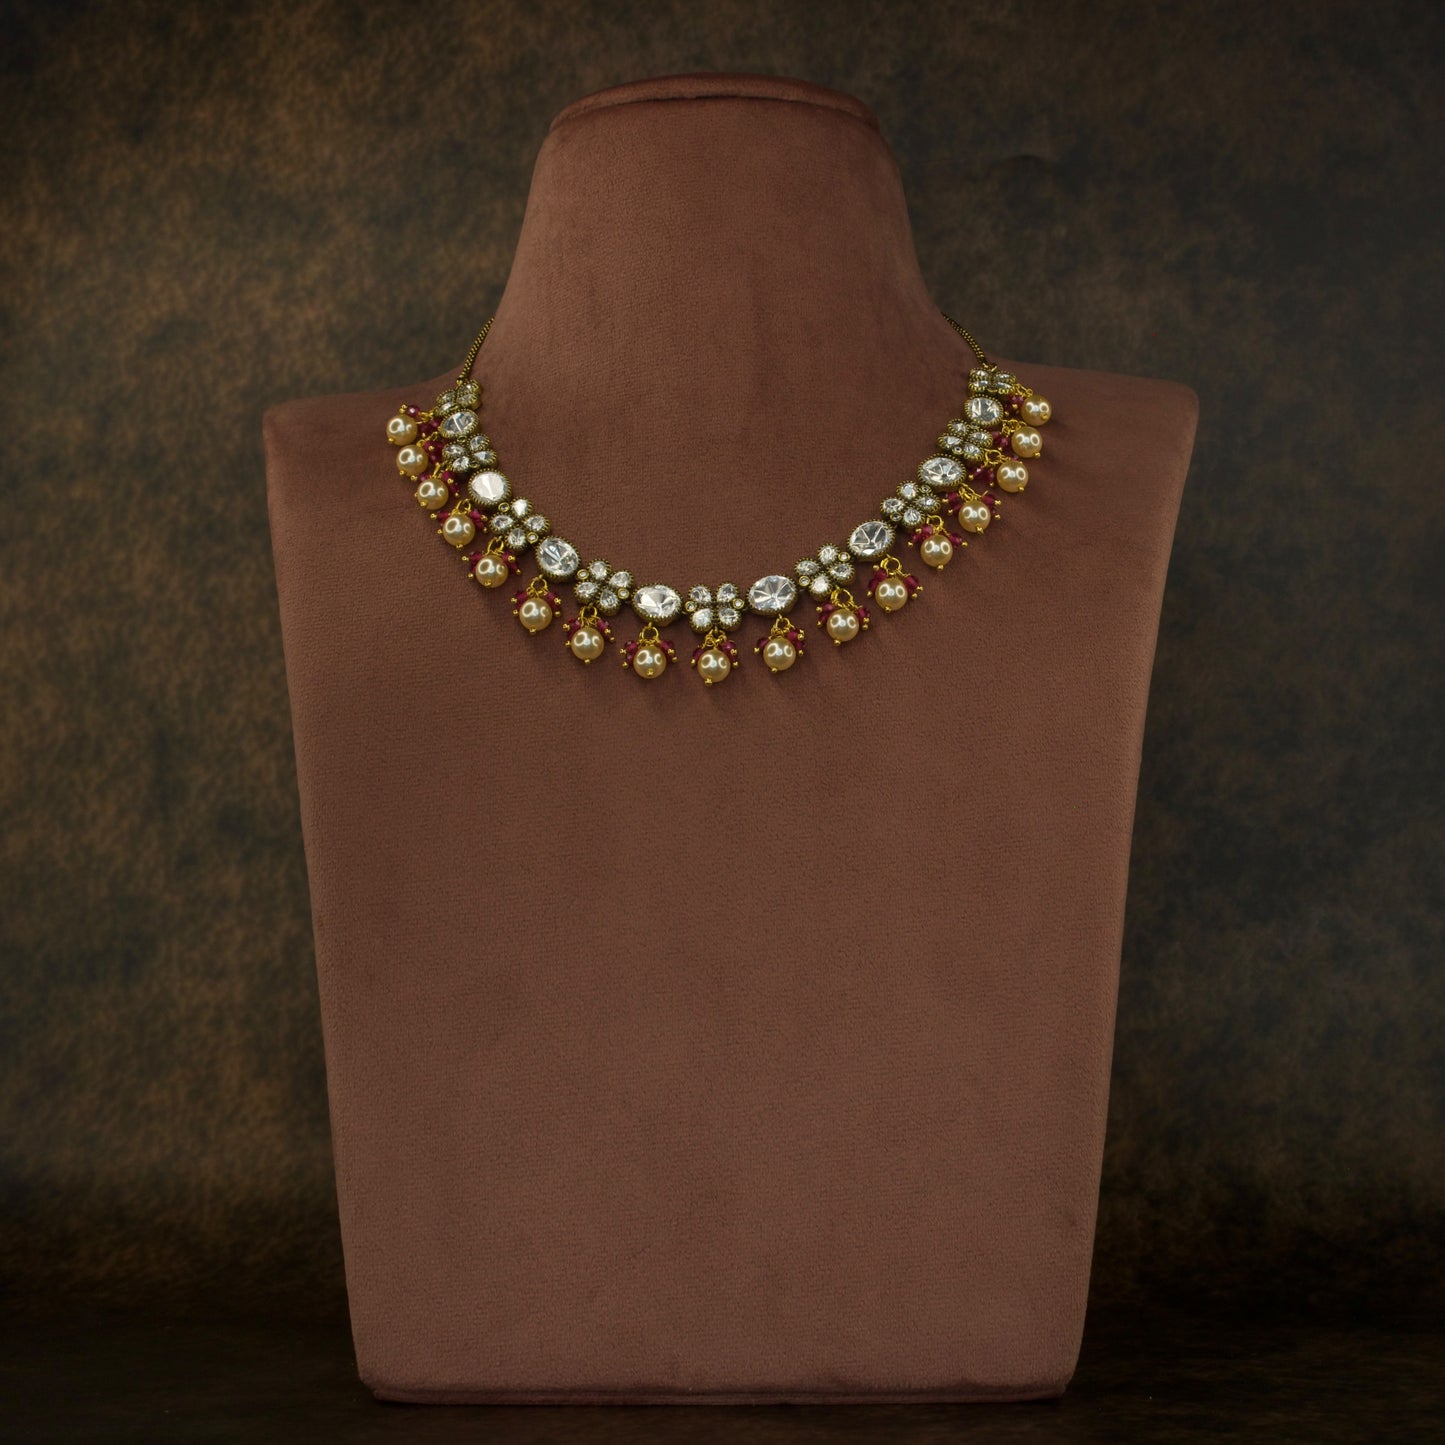 Minimalistic Short Victorian Polki Necklace setwith High Quality Victorian finish. This product belongs to Victorian jewellery category